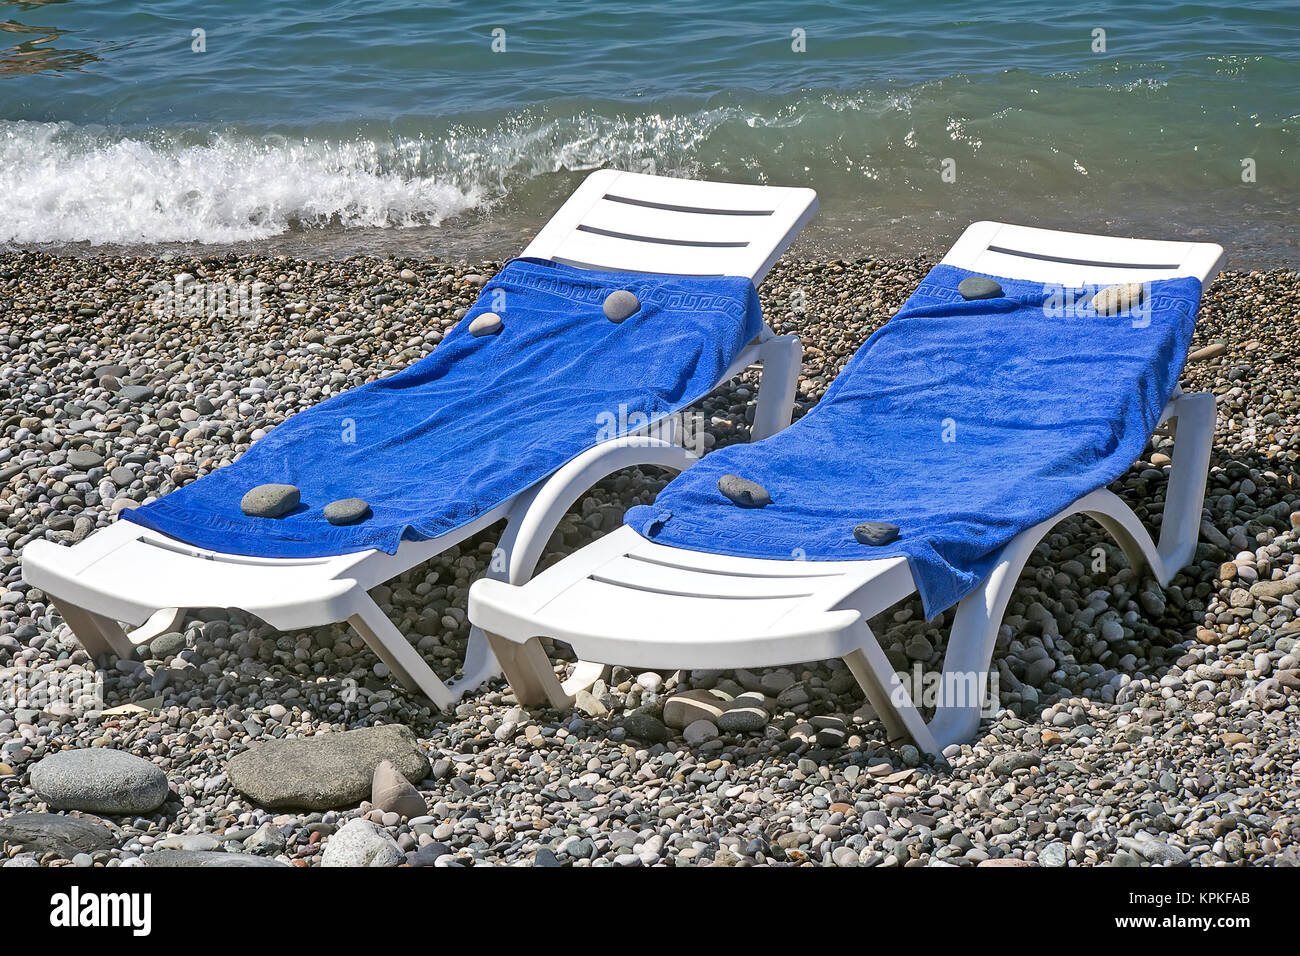 Two sun loungers for relaxing by the sea. Stock Photo